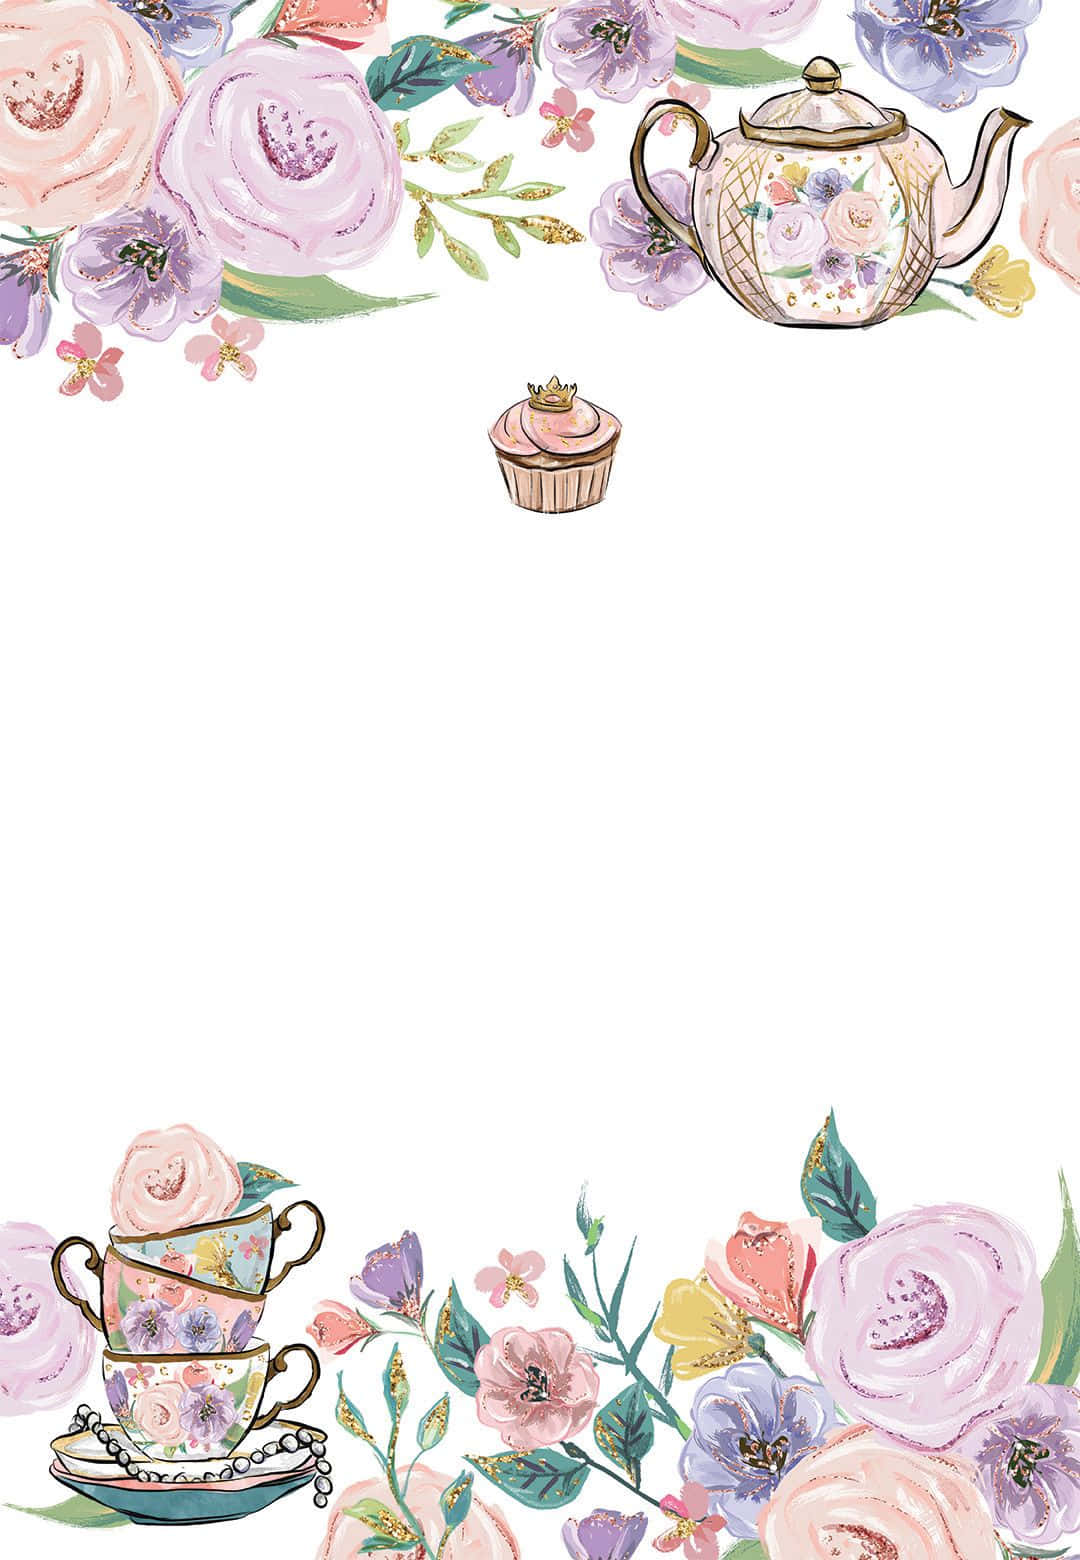 Celebrate a Special Occasion with a Tea Party.